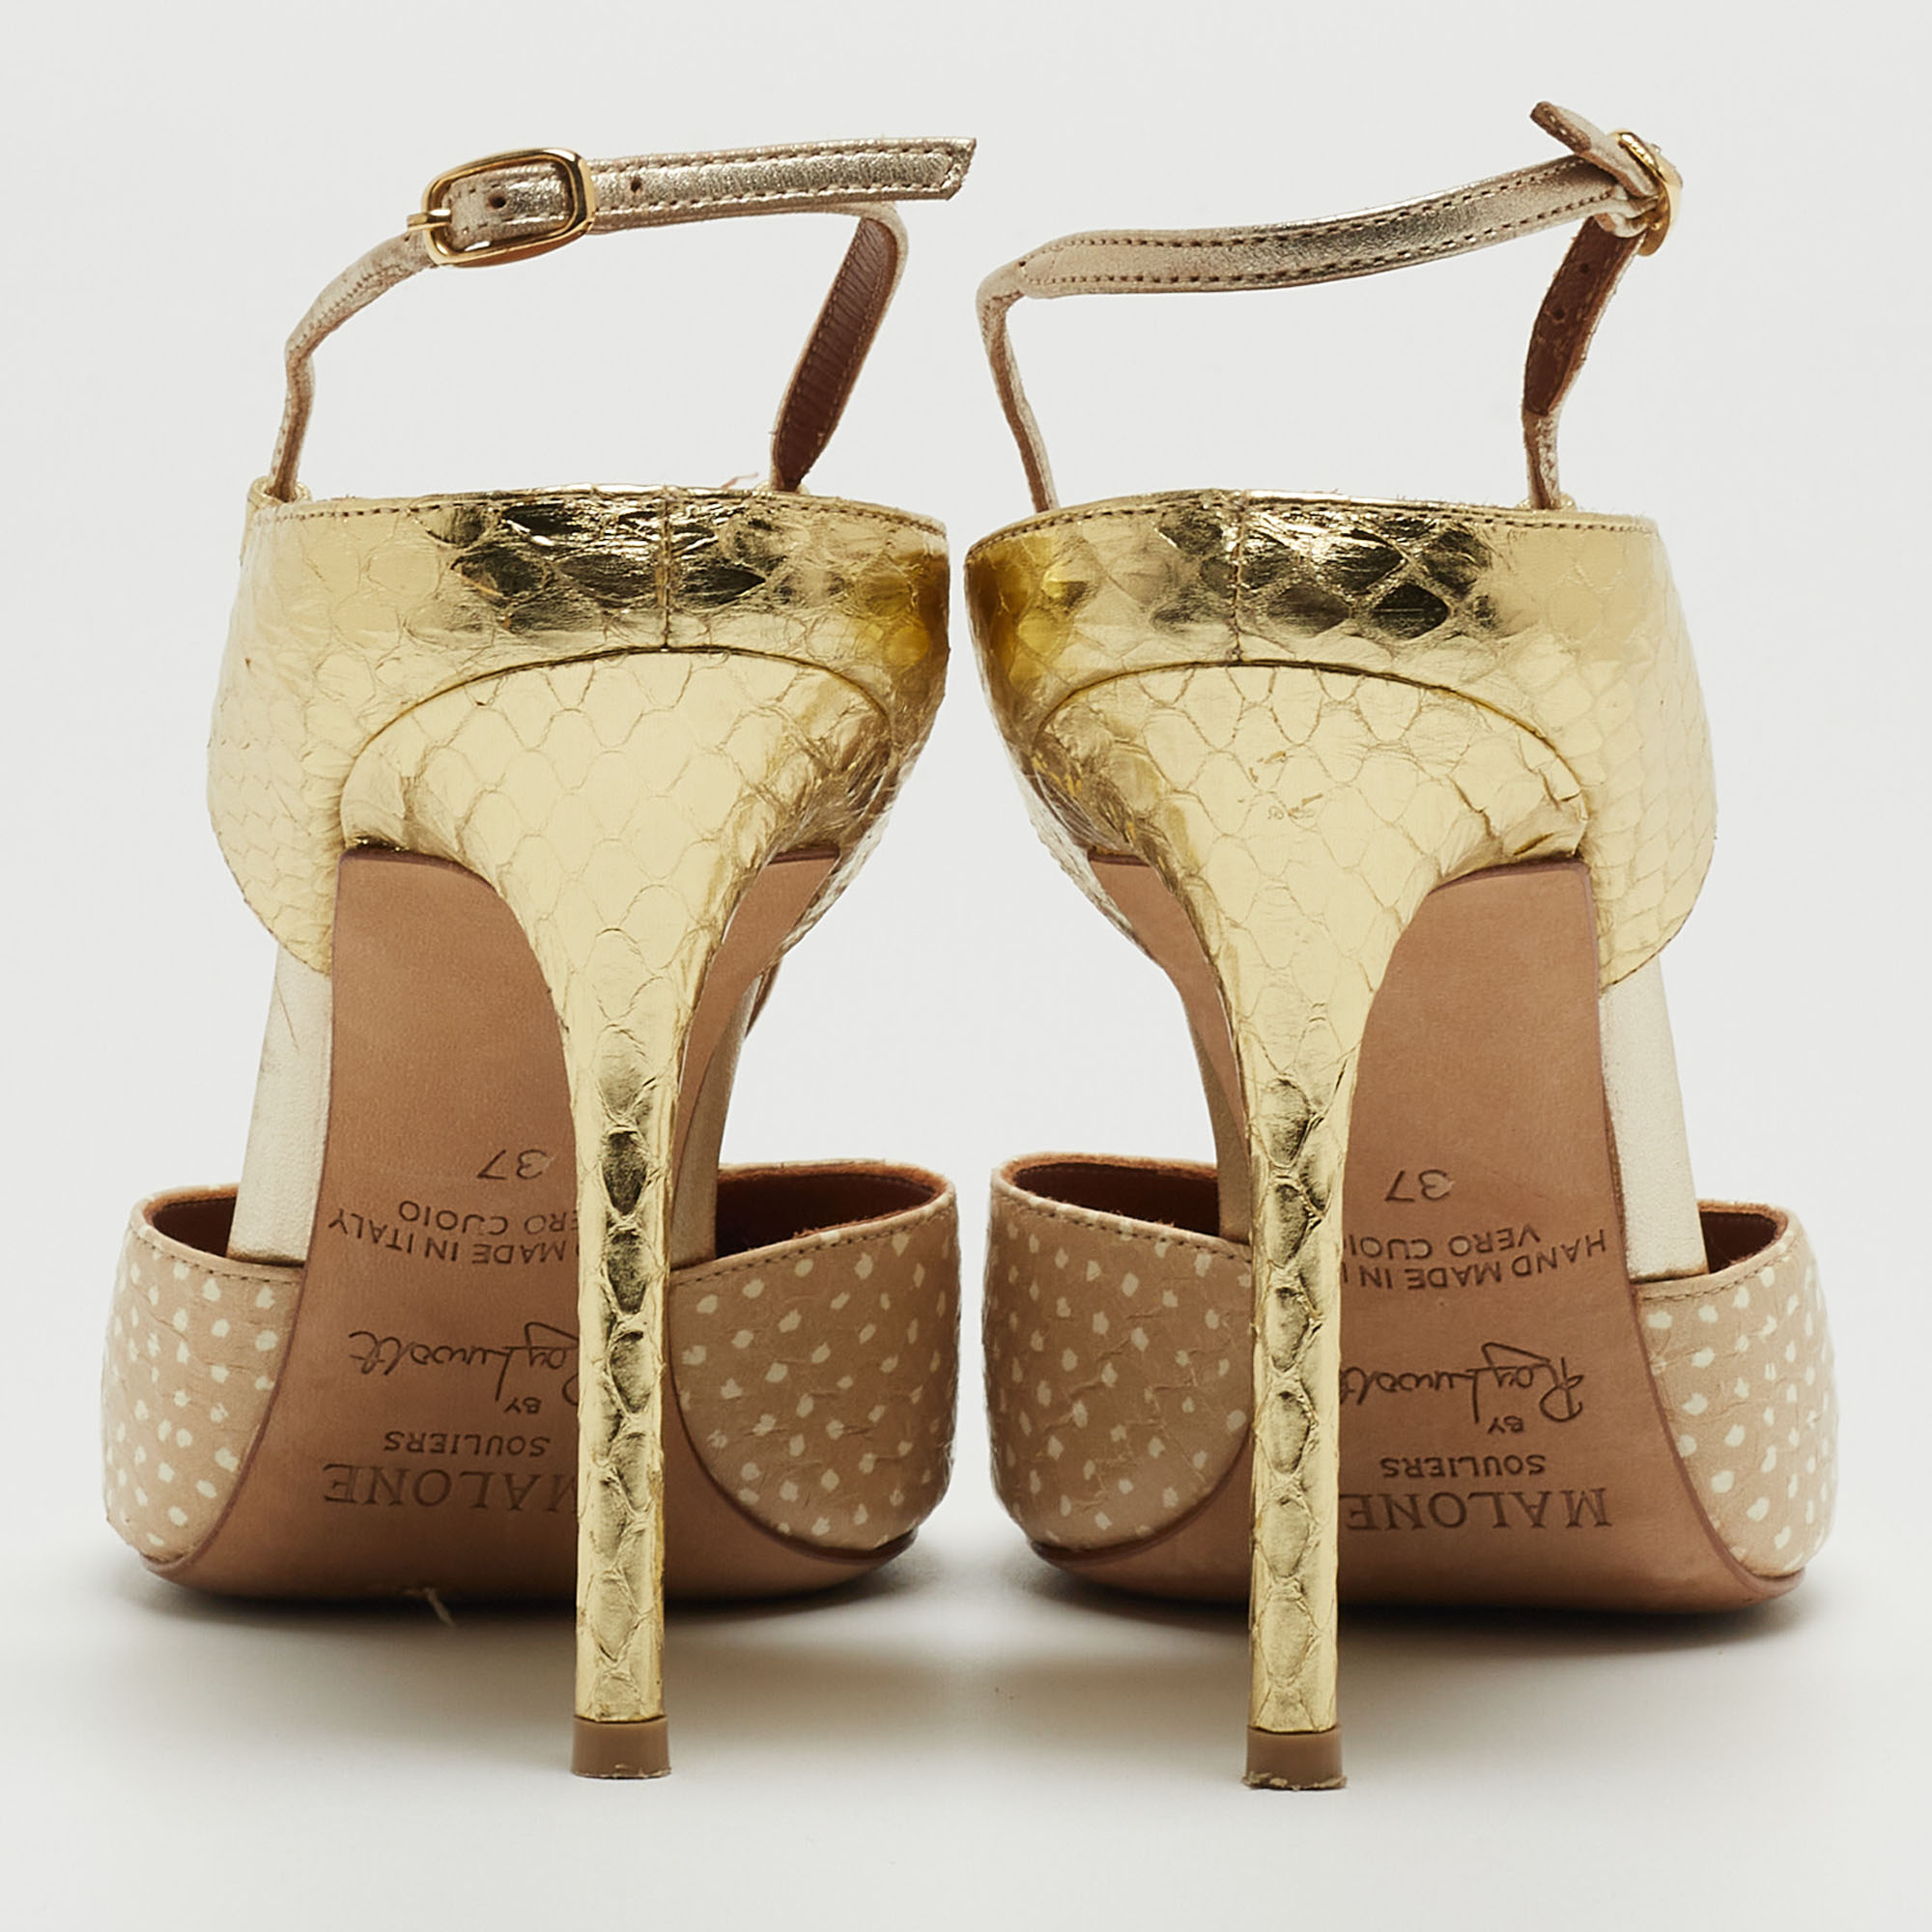 Malone Souliers Beige/Gold Printed Leather And Embossed Python Daria Pumps Size 37